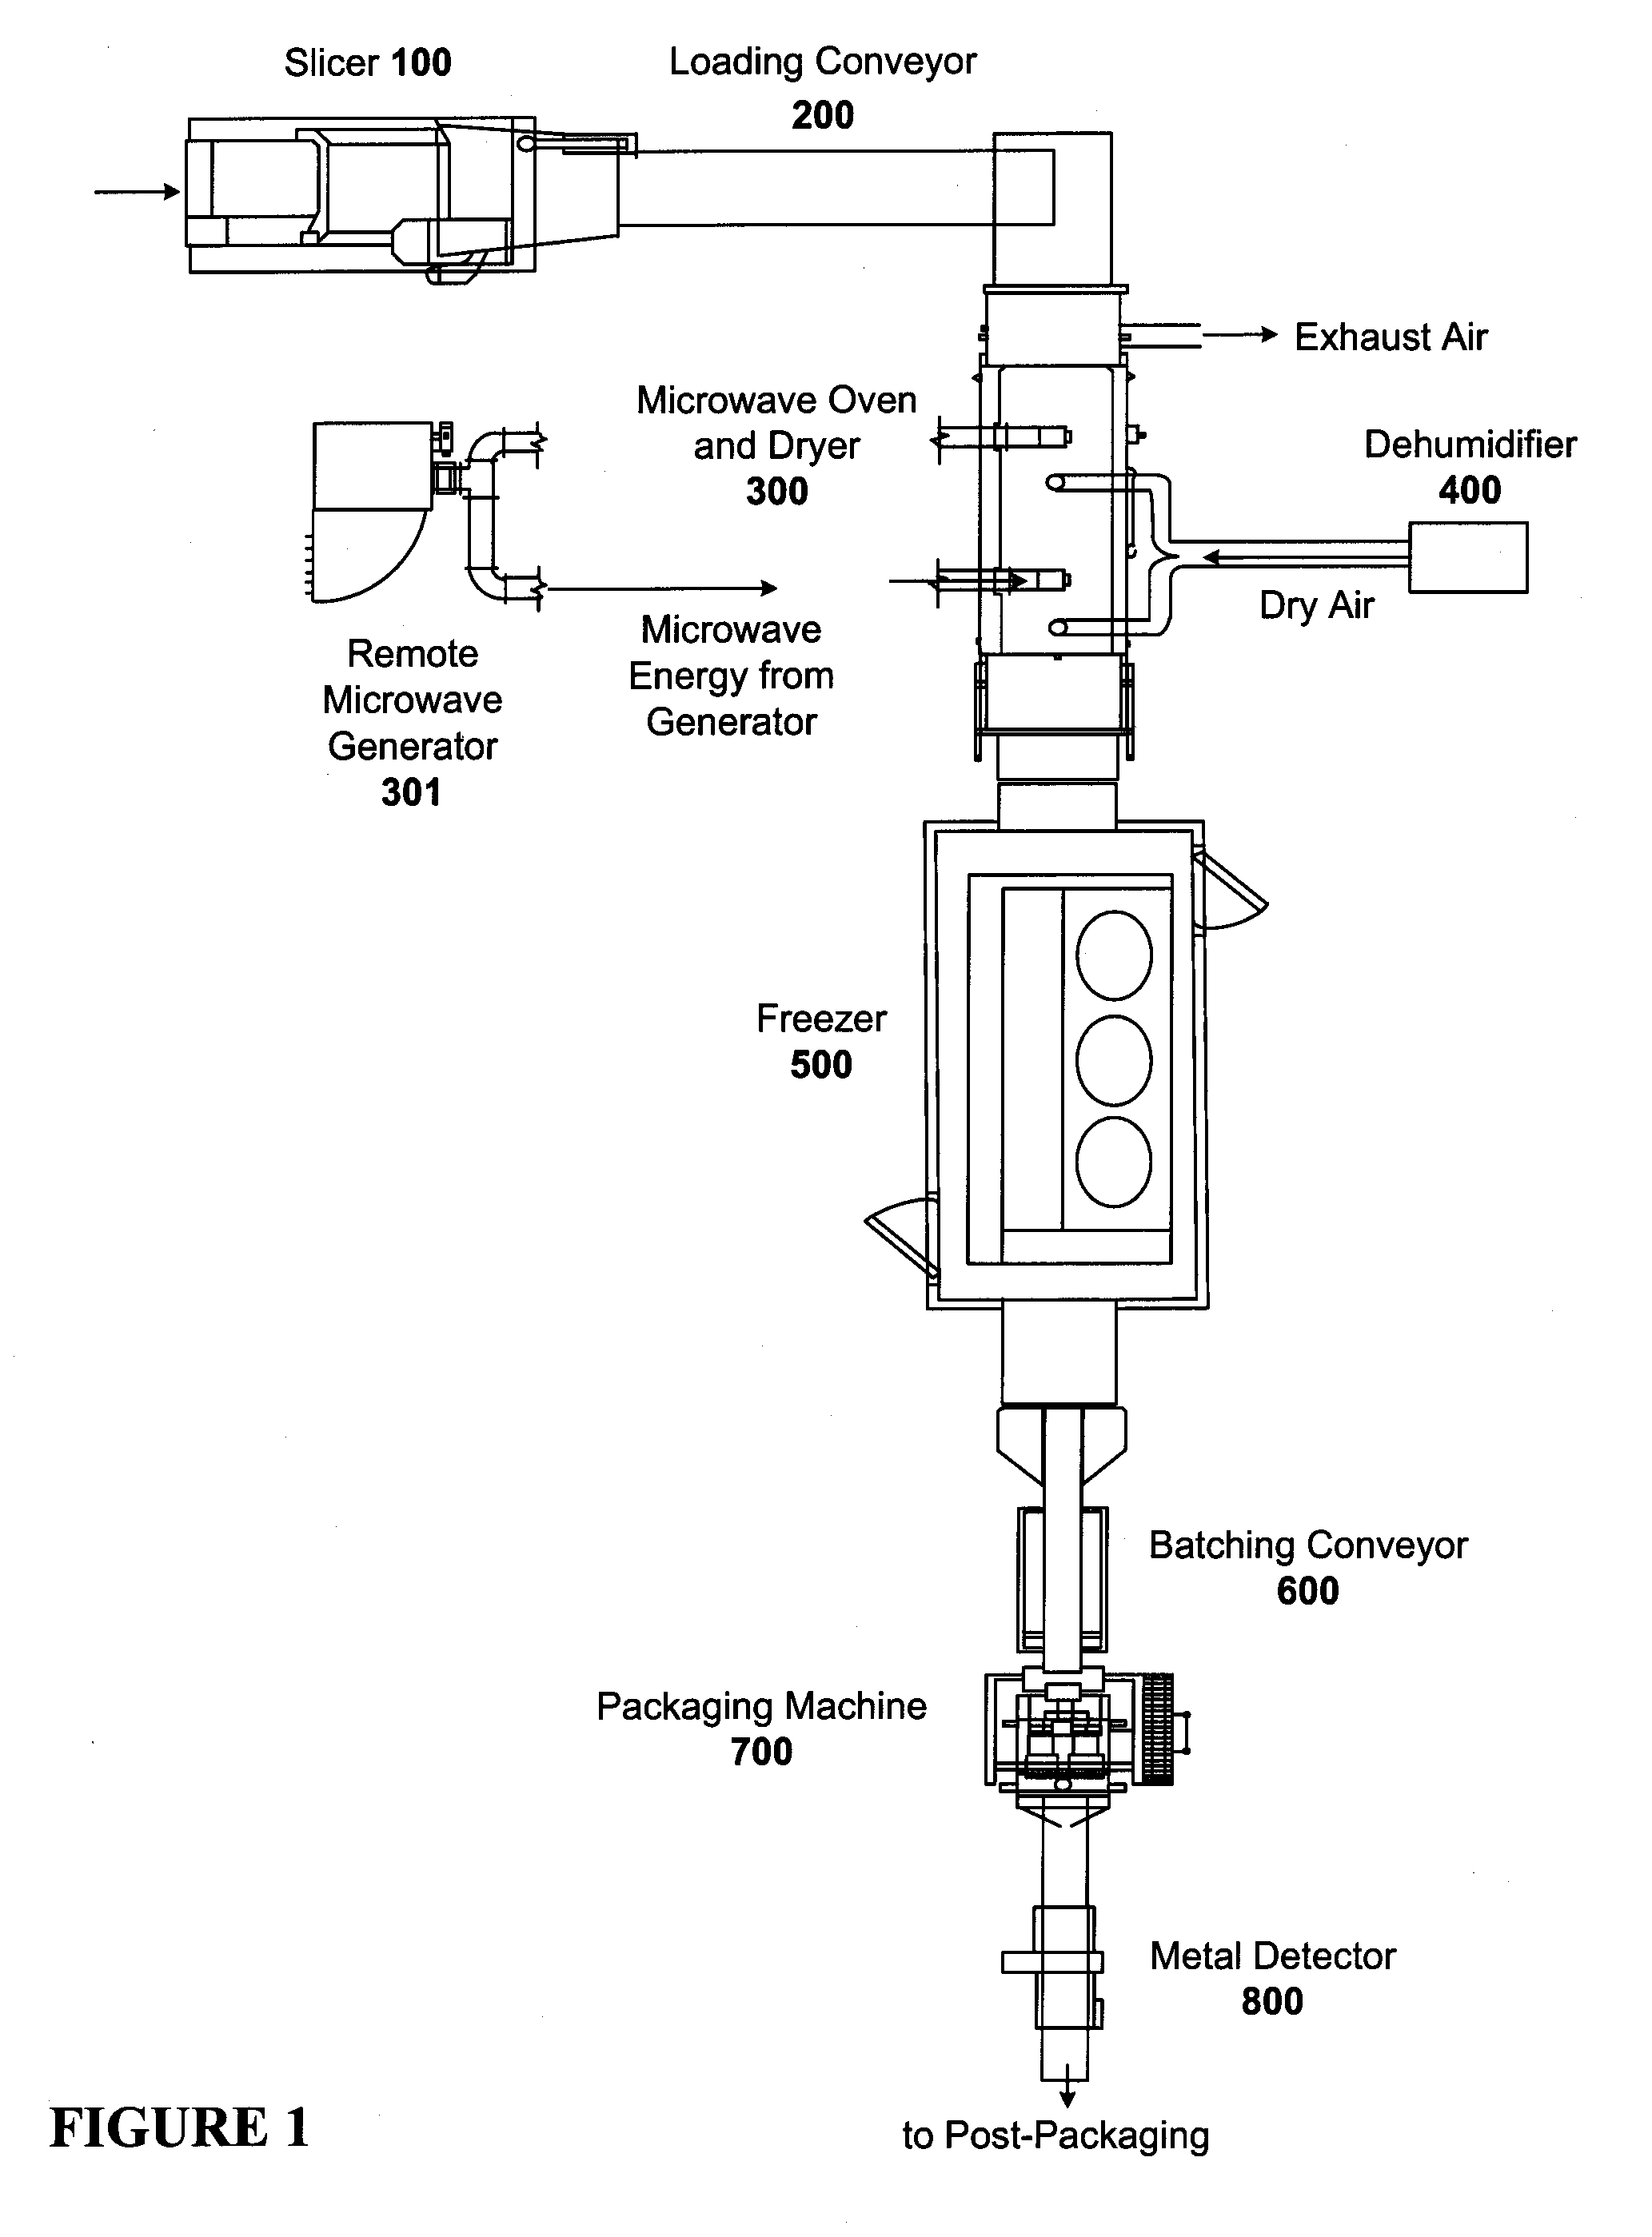 Process and Apparatus for Rapid Preparation of Dry Sausage